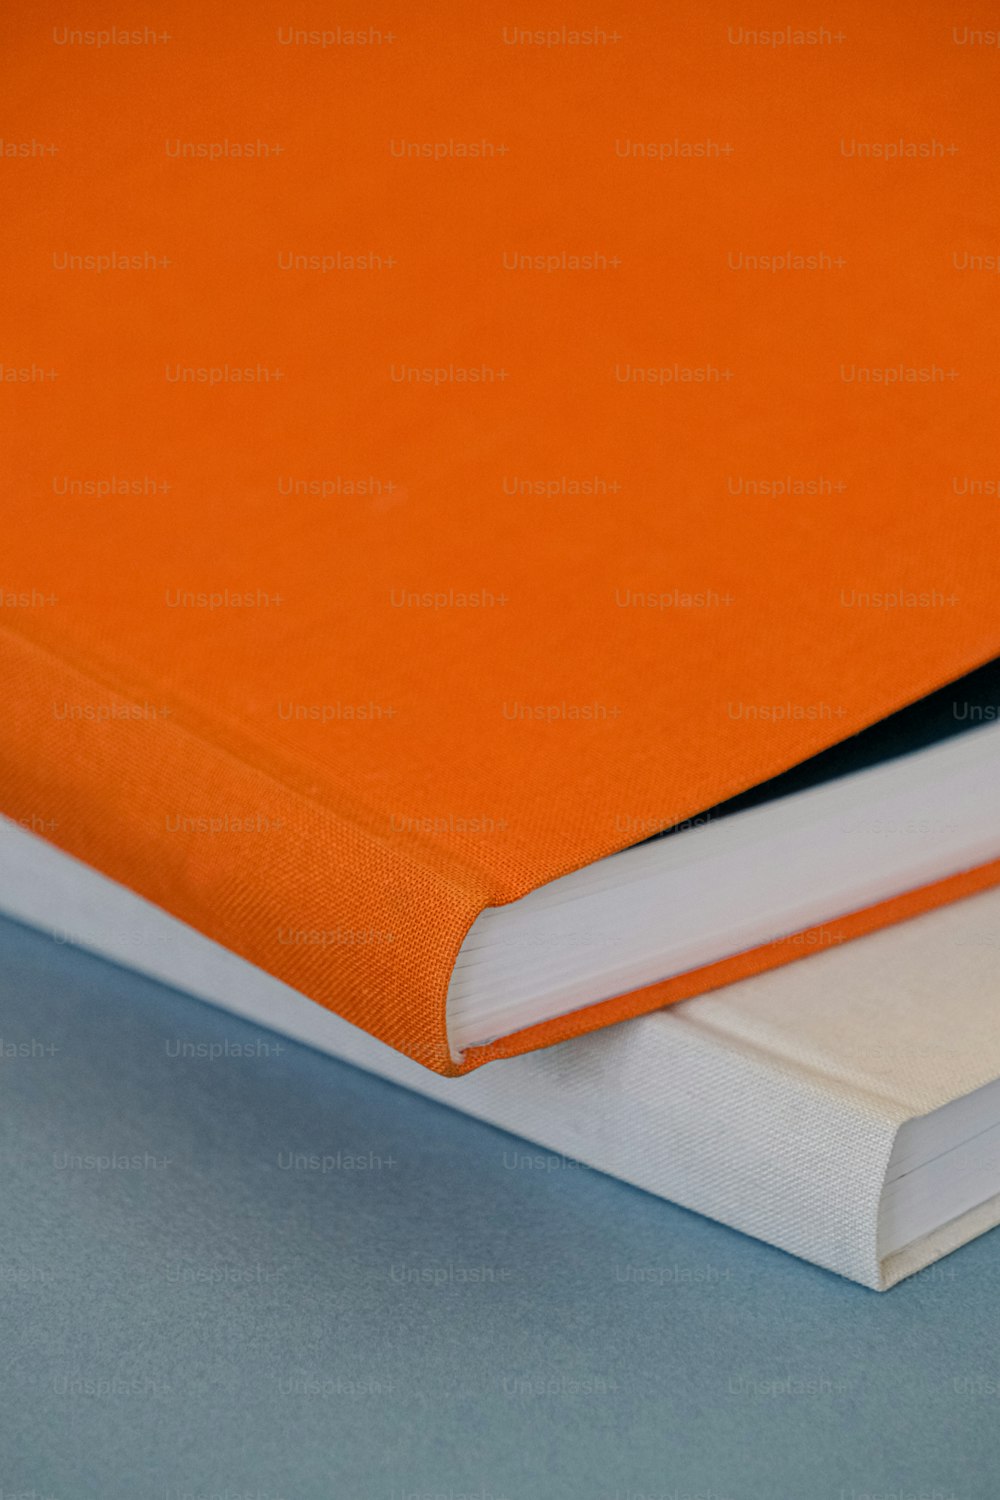 a close up of a book on a table